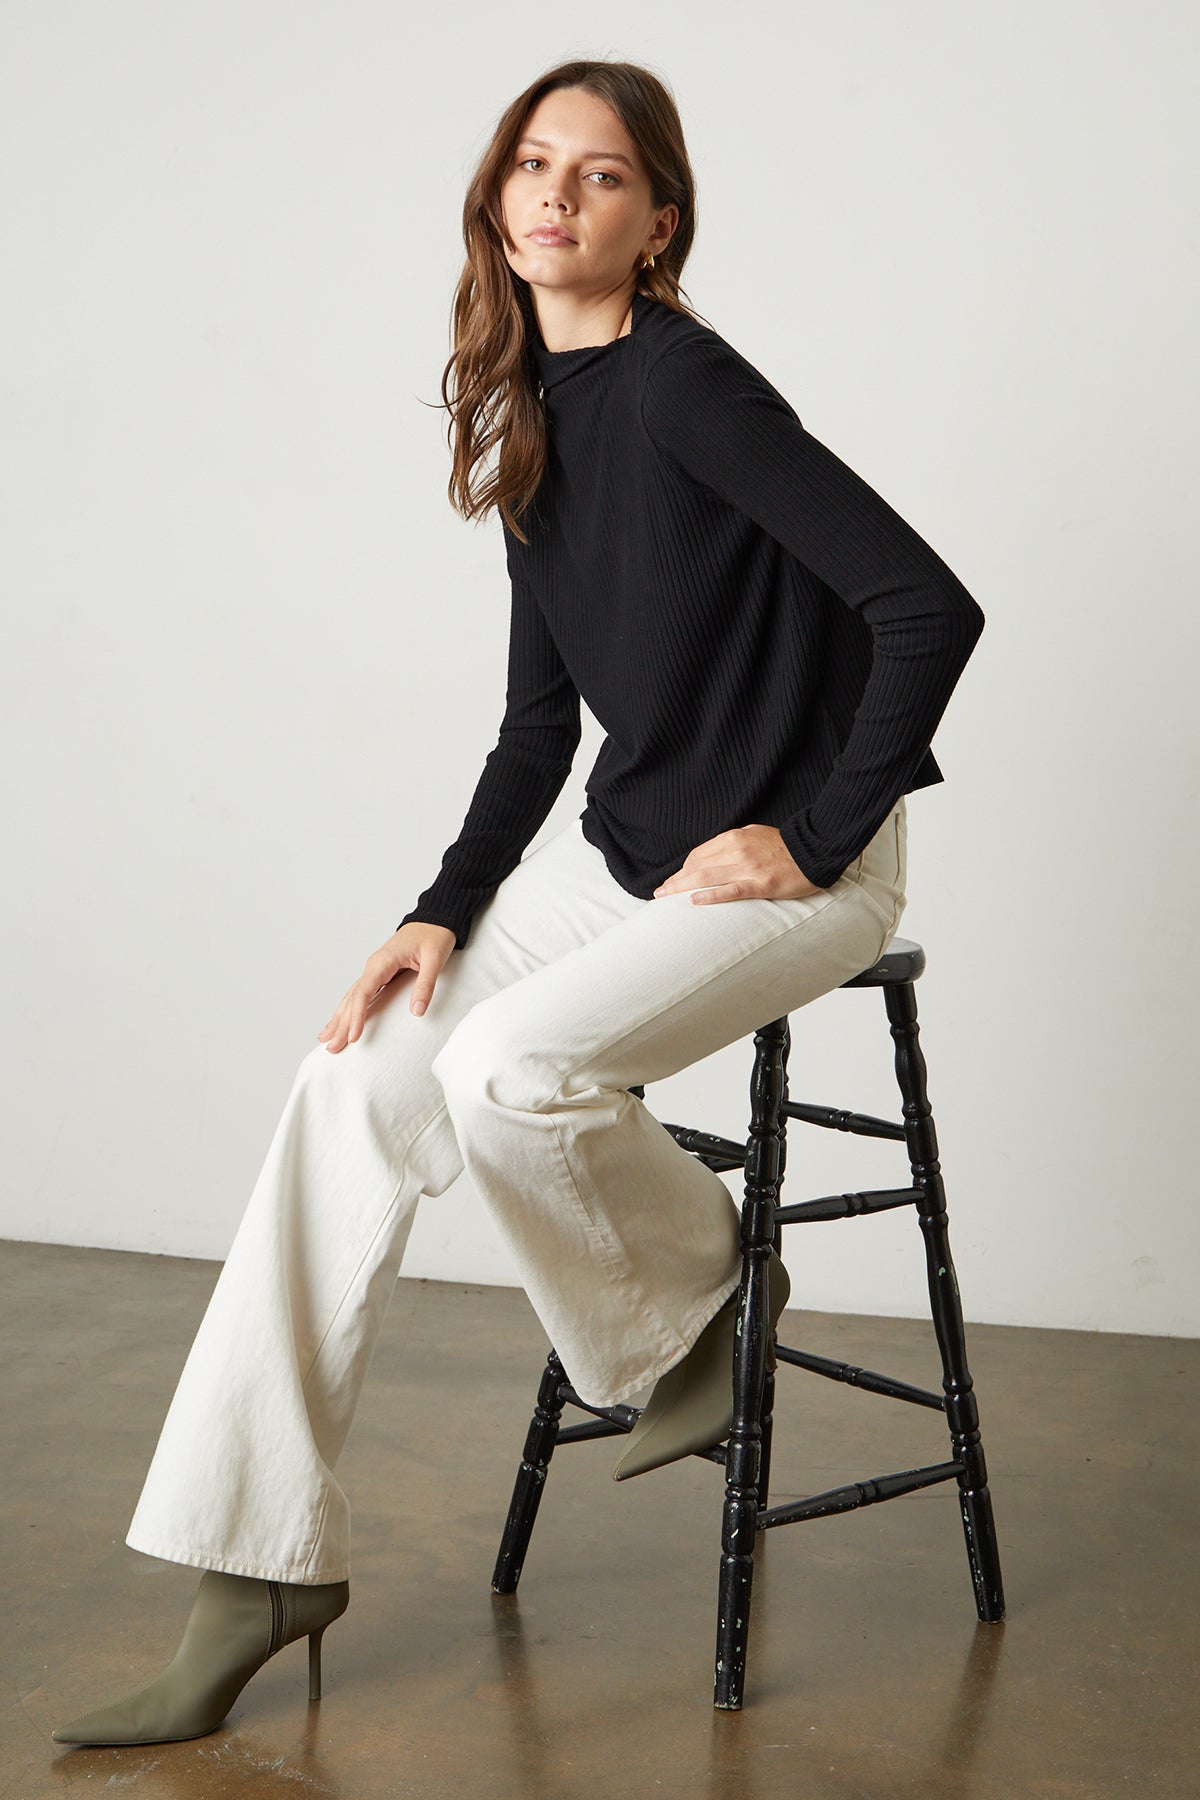   The model is sitting on a stool in a Velvet by Graham & Spencer DEANNA MOCK NECK TOP and white pants. 